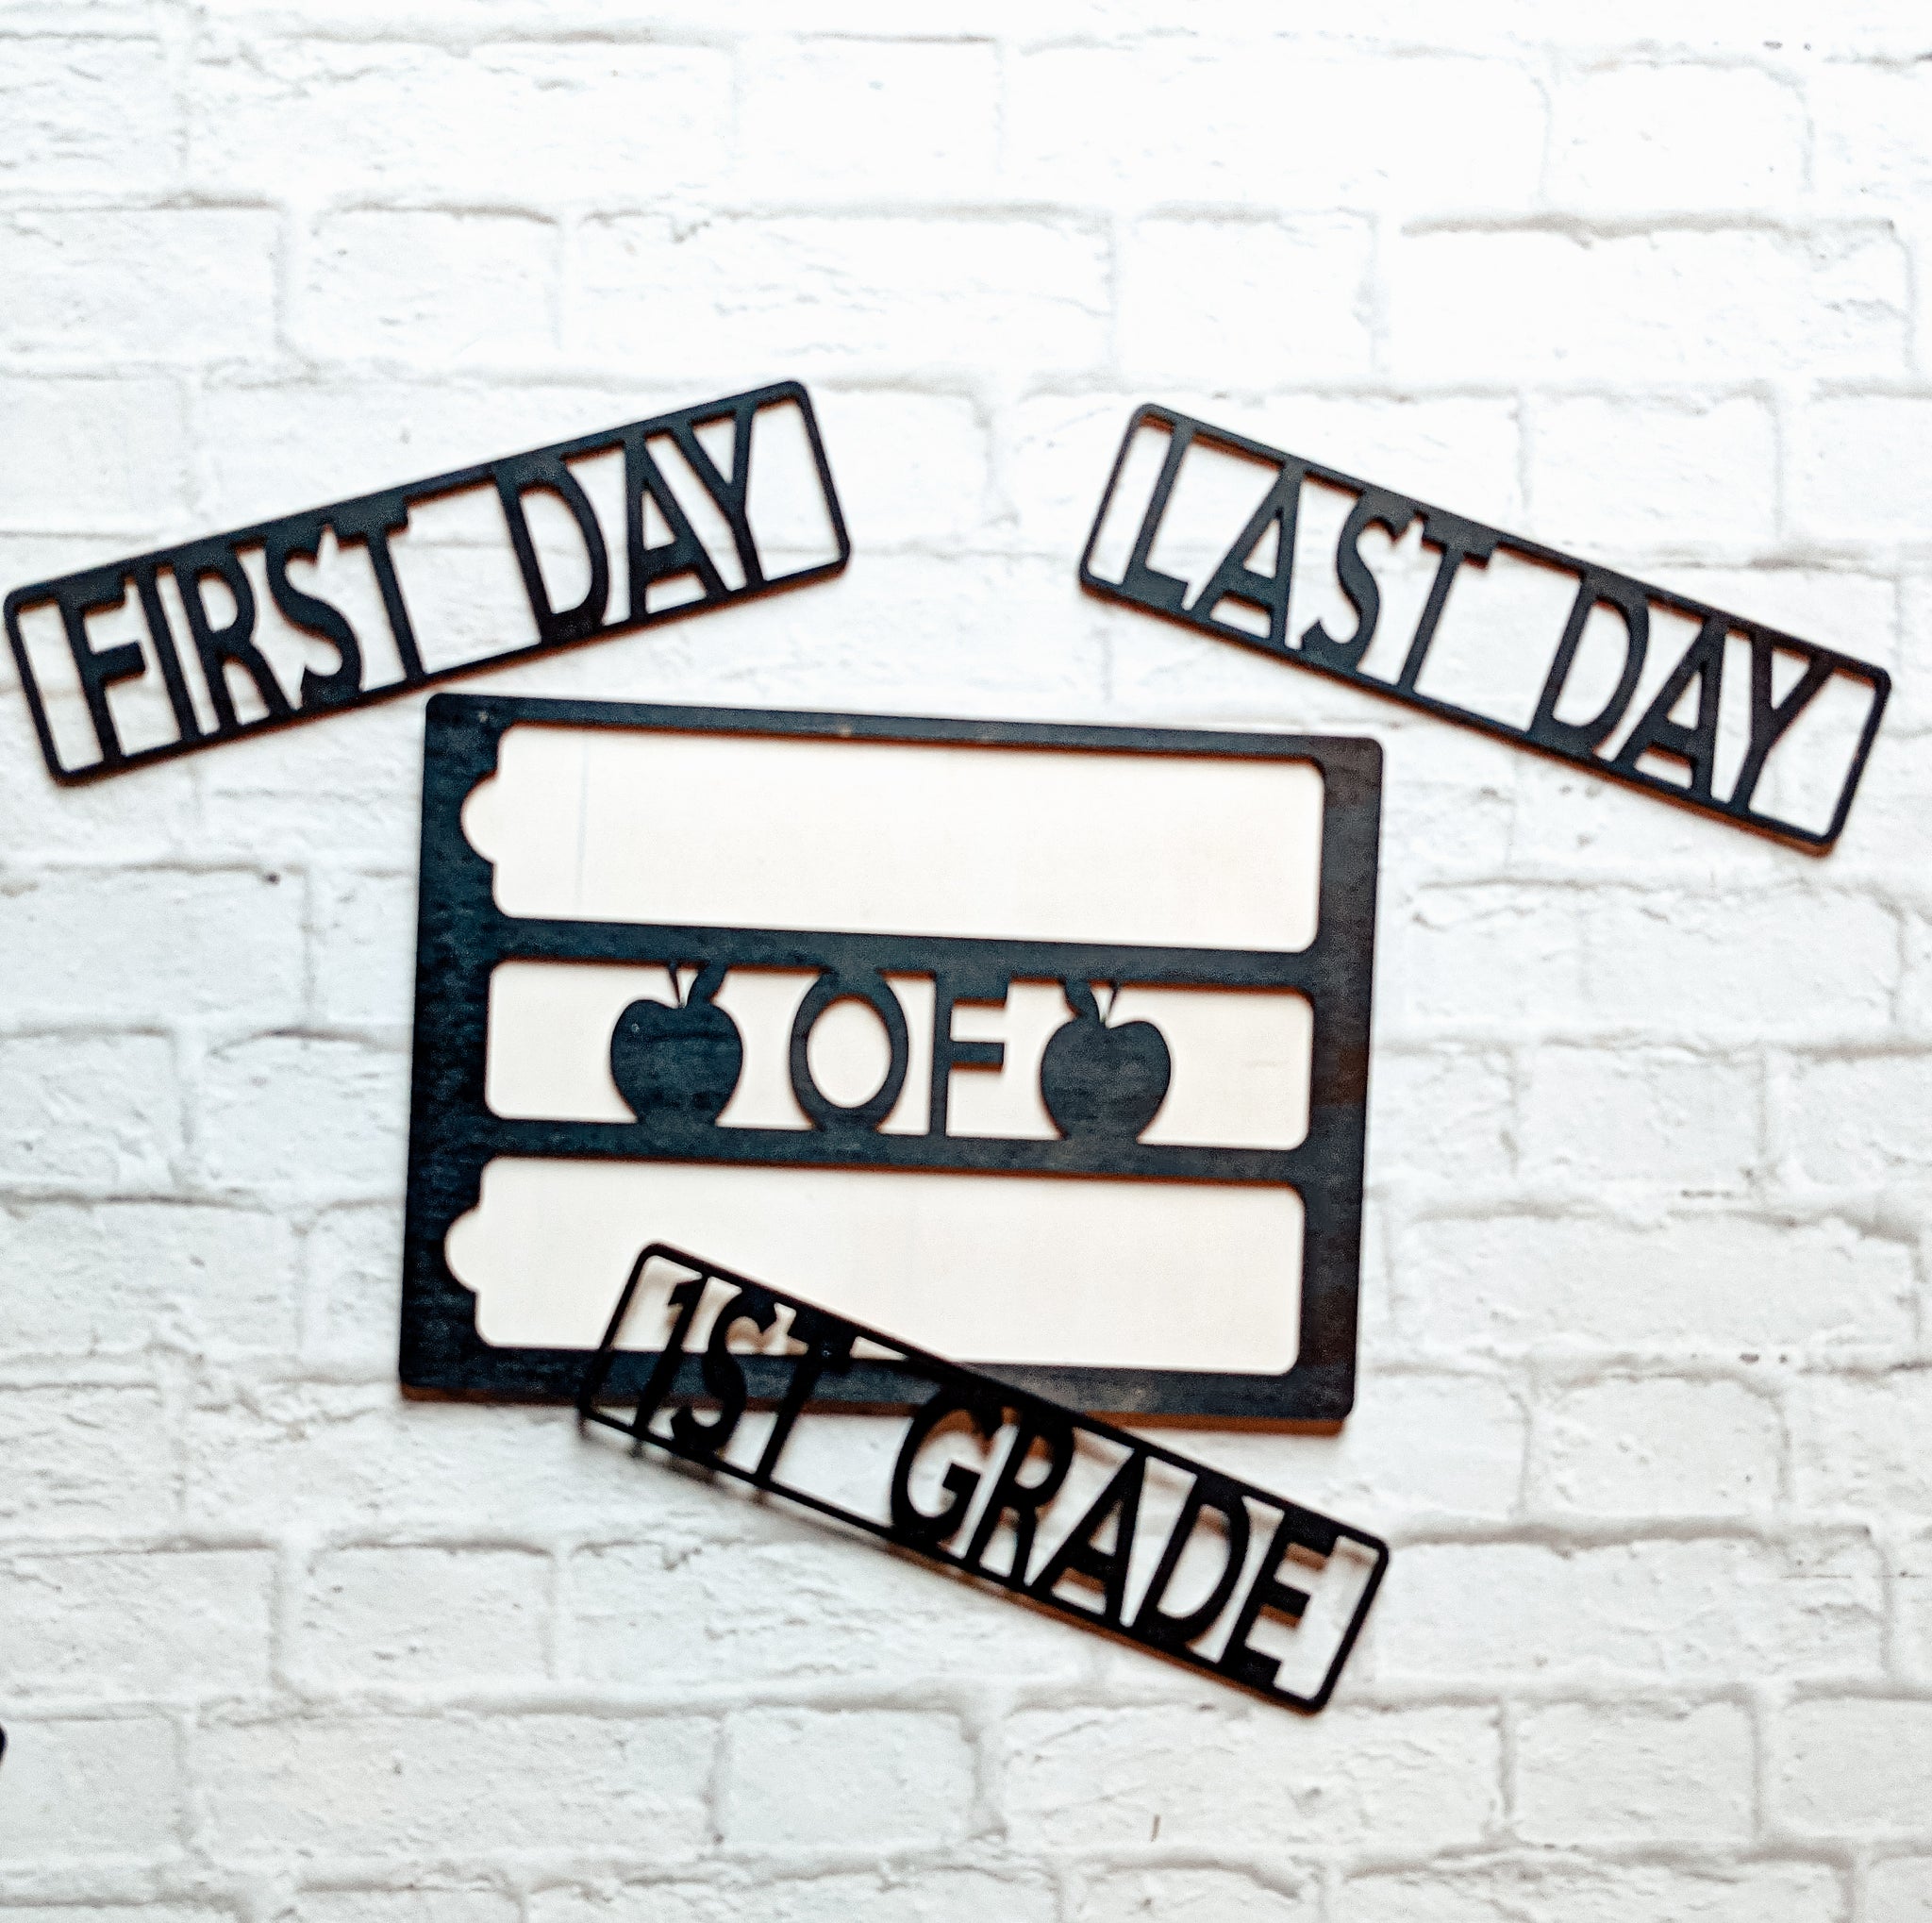 First Day of school sign, first day of school photo prop, interchangeable first day of school sign